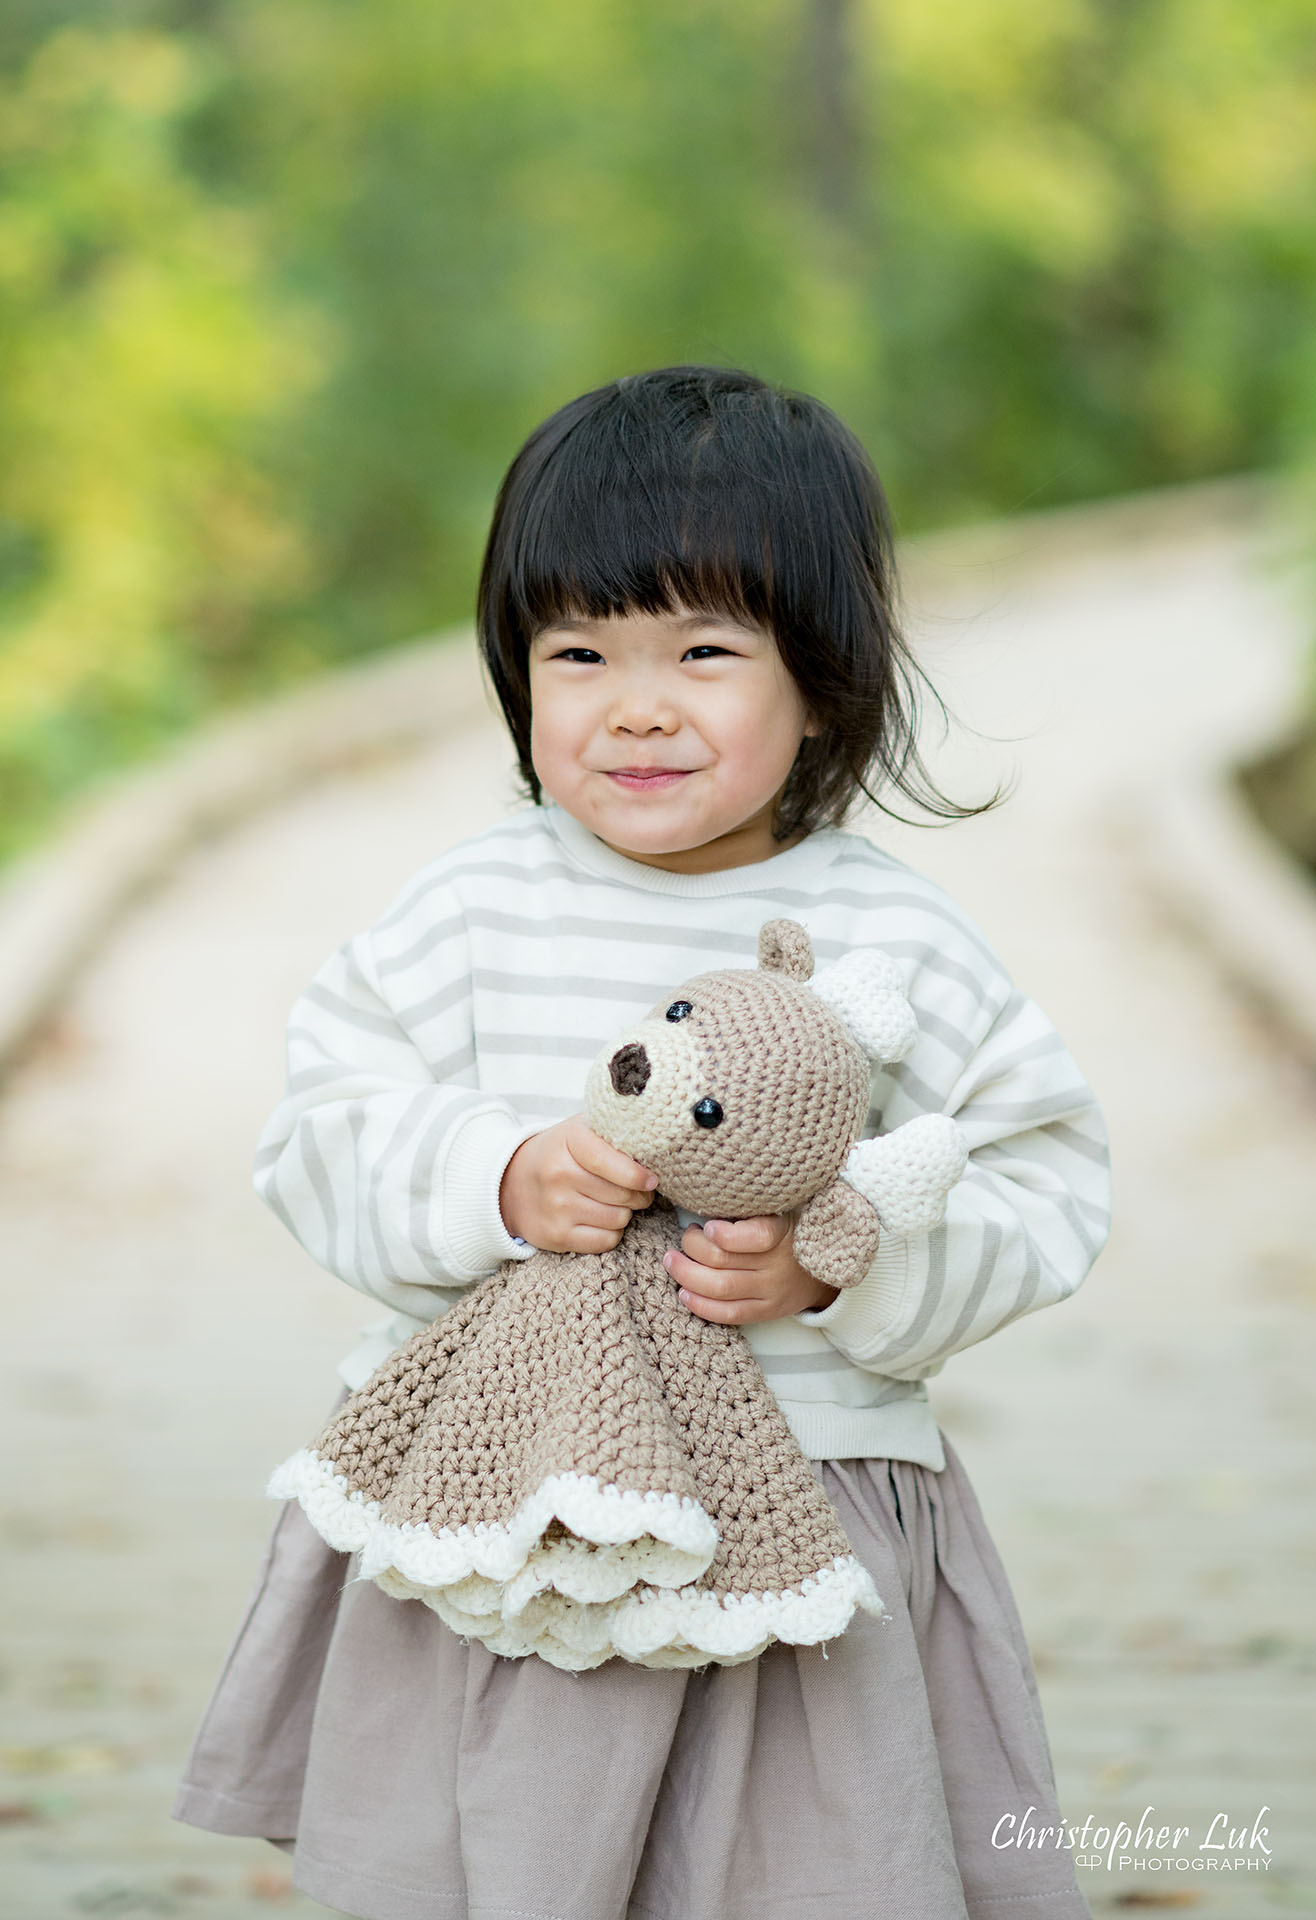 Christopher Luk Markham Family Photographer Autumn Leaves Fall Season Candid Photojournalistic Natural Bright Timeless Daughter Sister Stuffed Animal Smile Detail